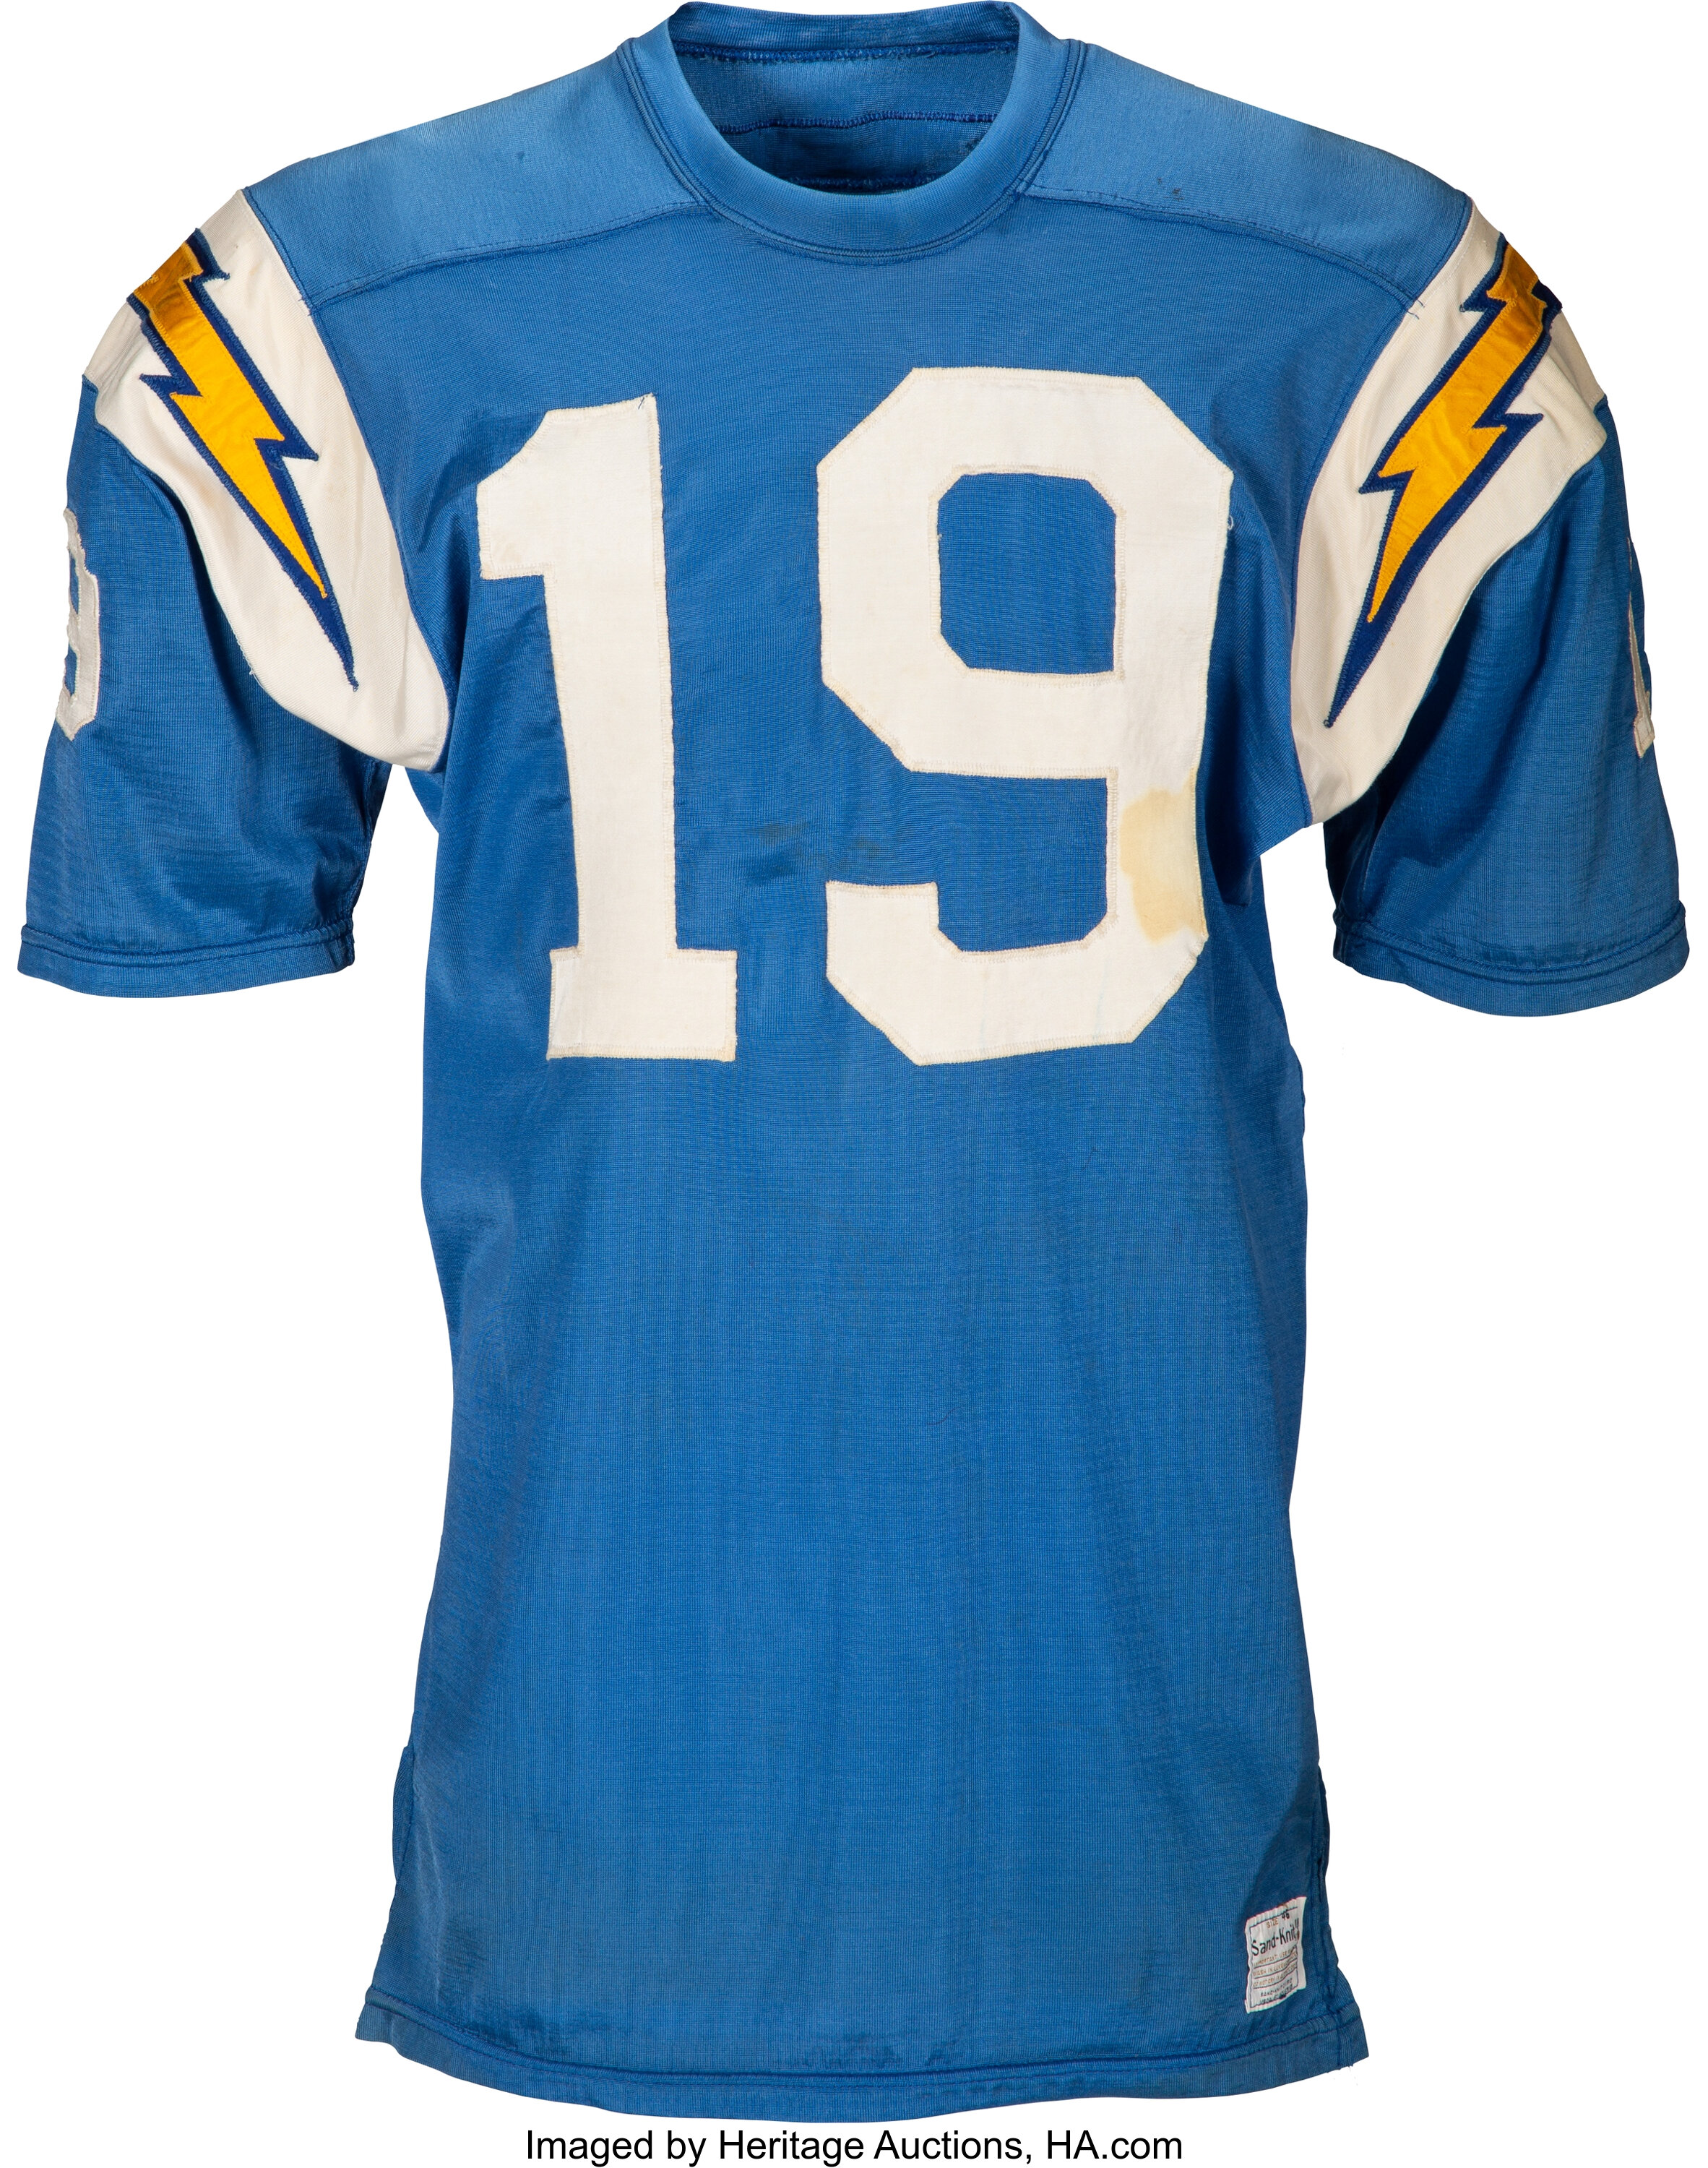 Lance Alworth San Diego Chargers Youth Nike Retired Game Jersey